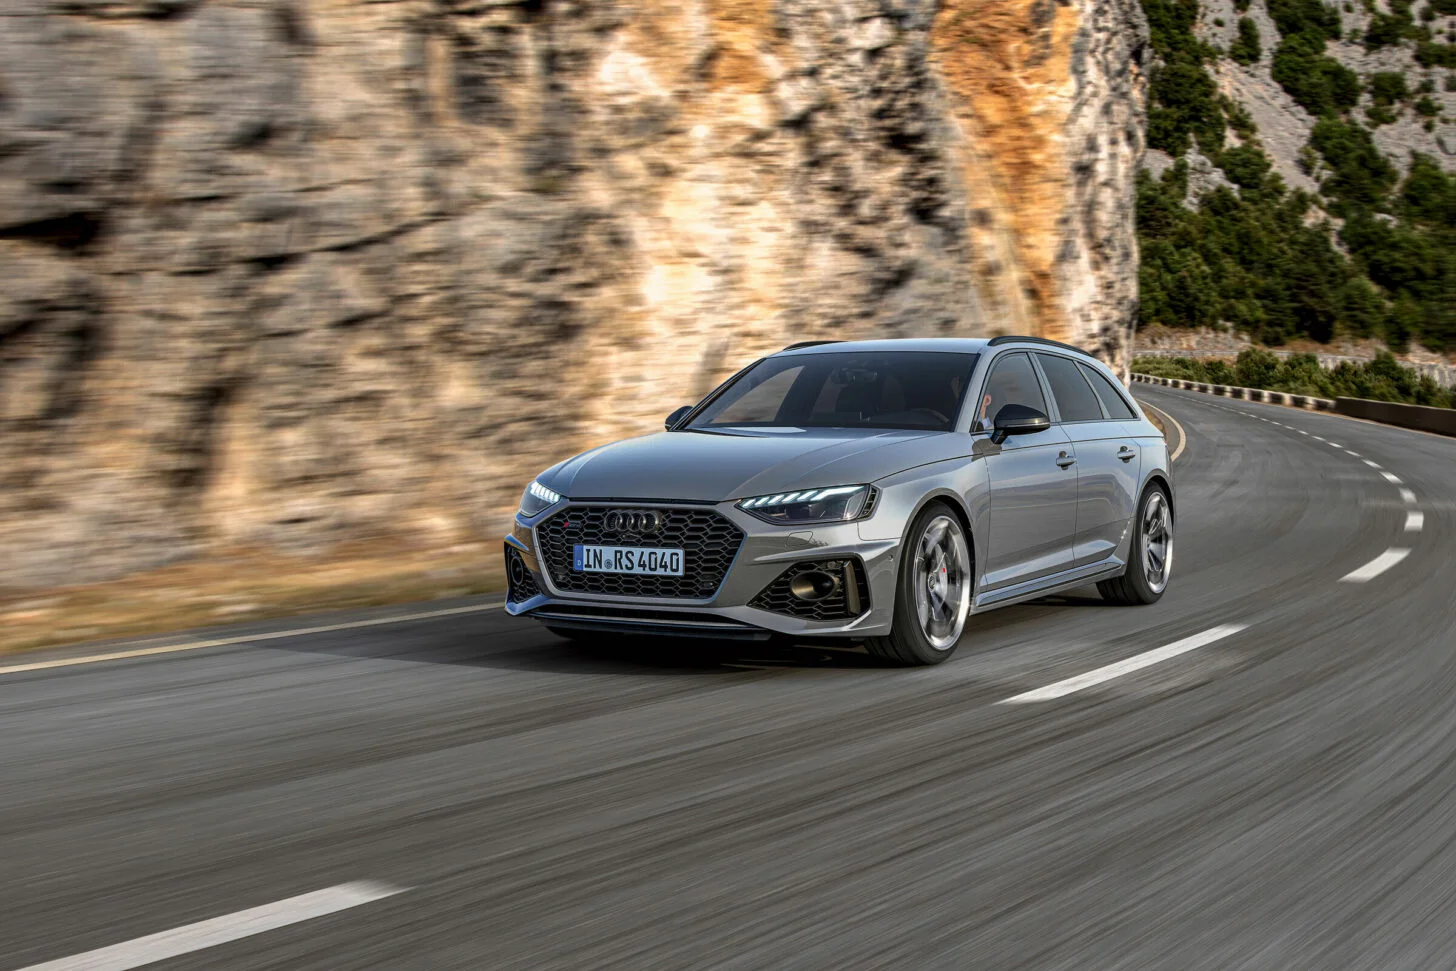 Audi RS 4 Avant and Audi RS 5 receive new exclusive packages